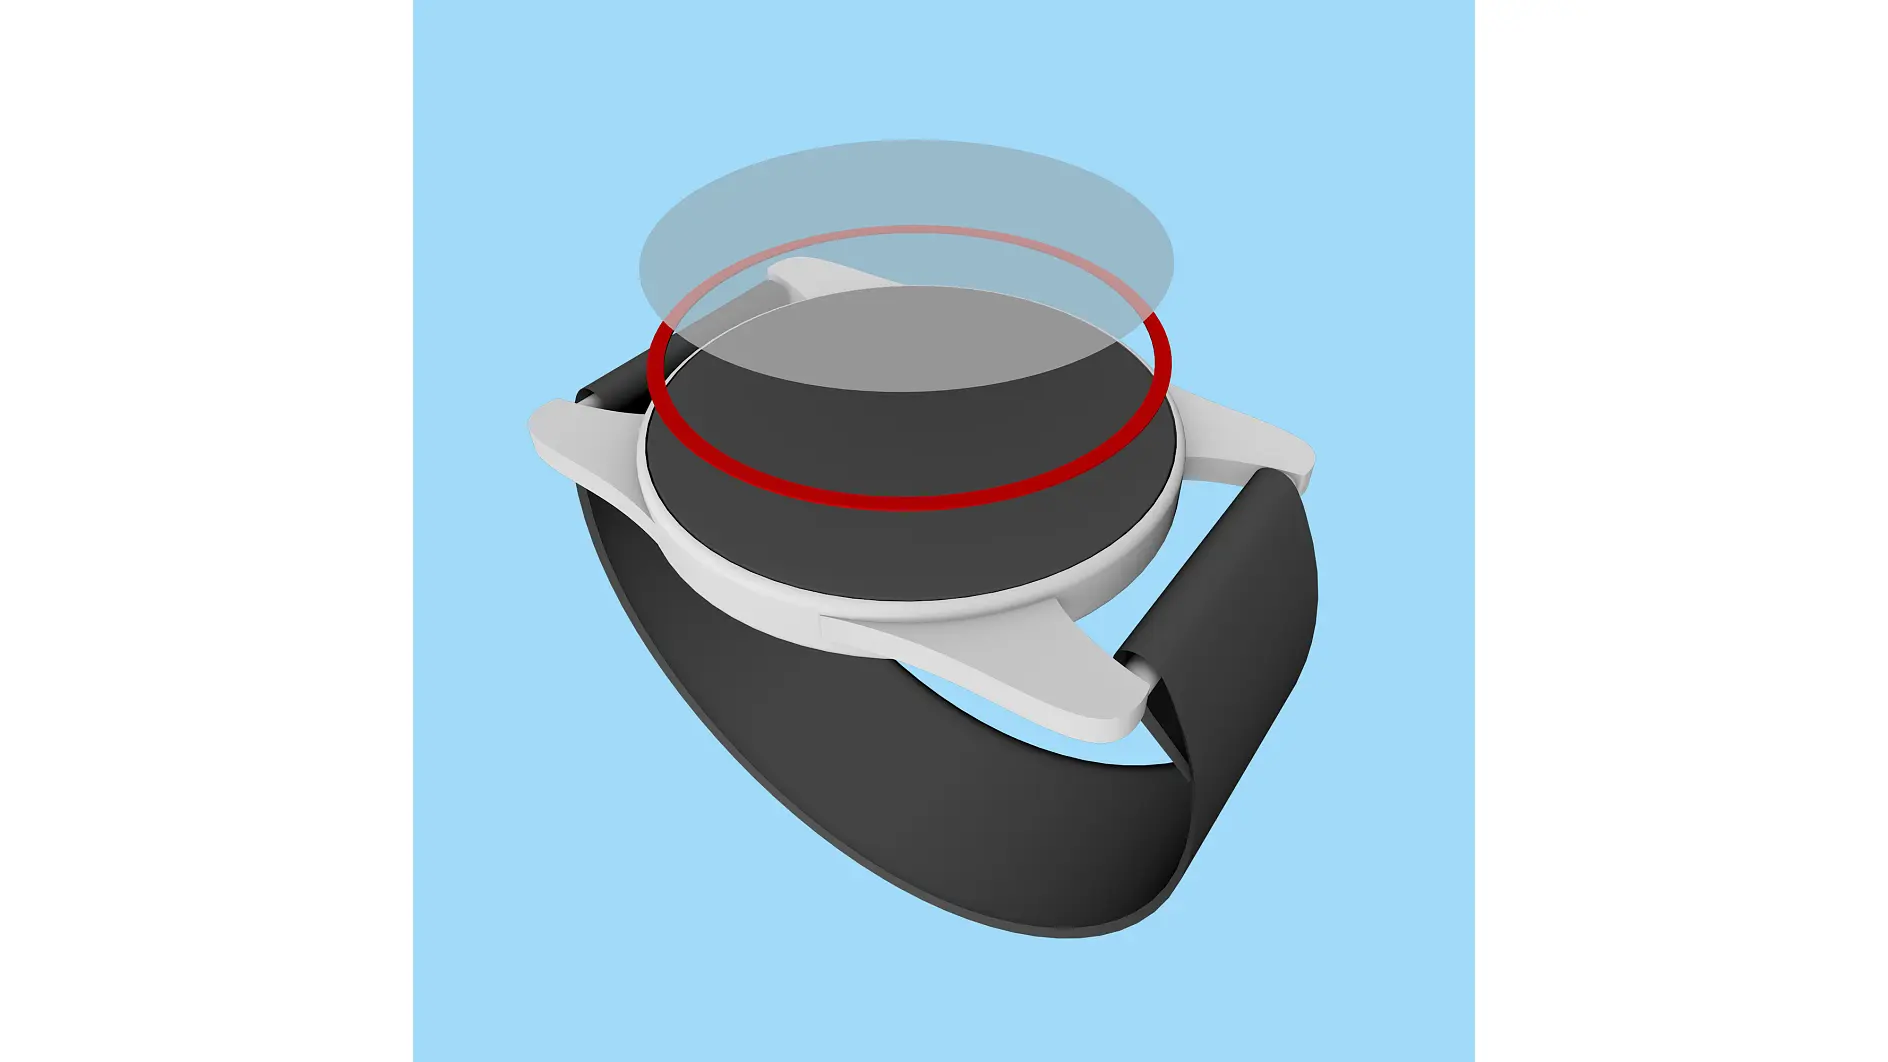 Lens mounting tape for smartwatch cover (lens) mounting with high adhesive strength, impact resistance and chemical resistance